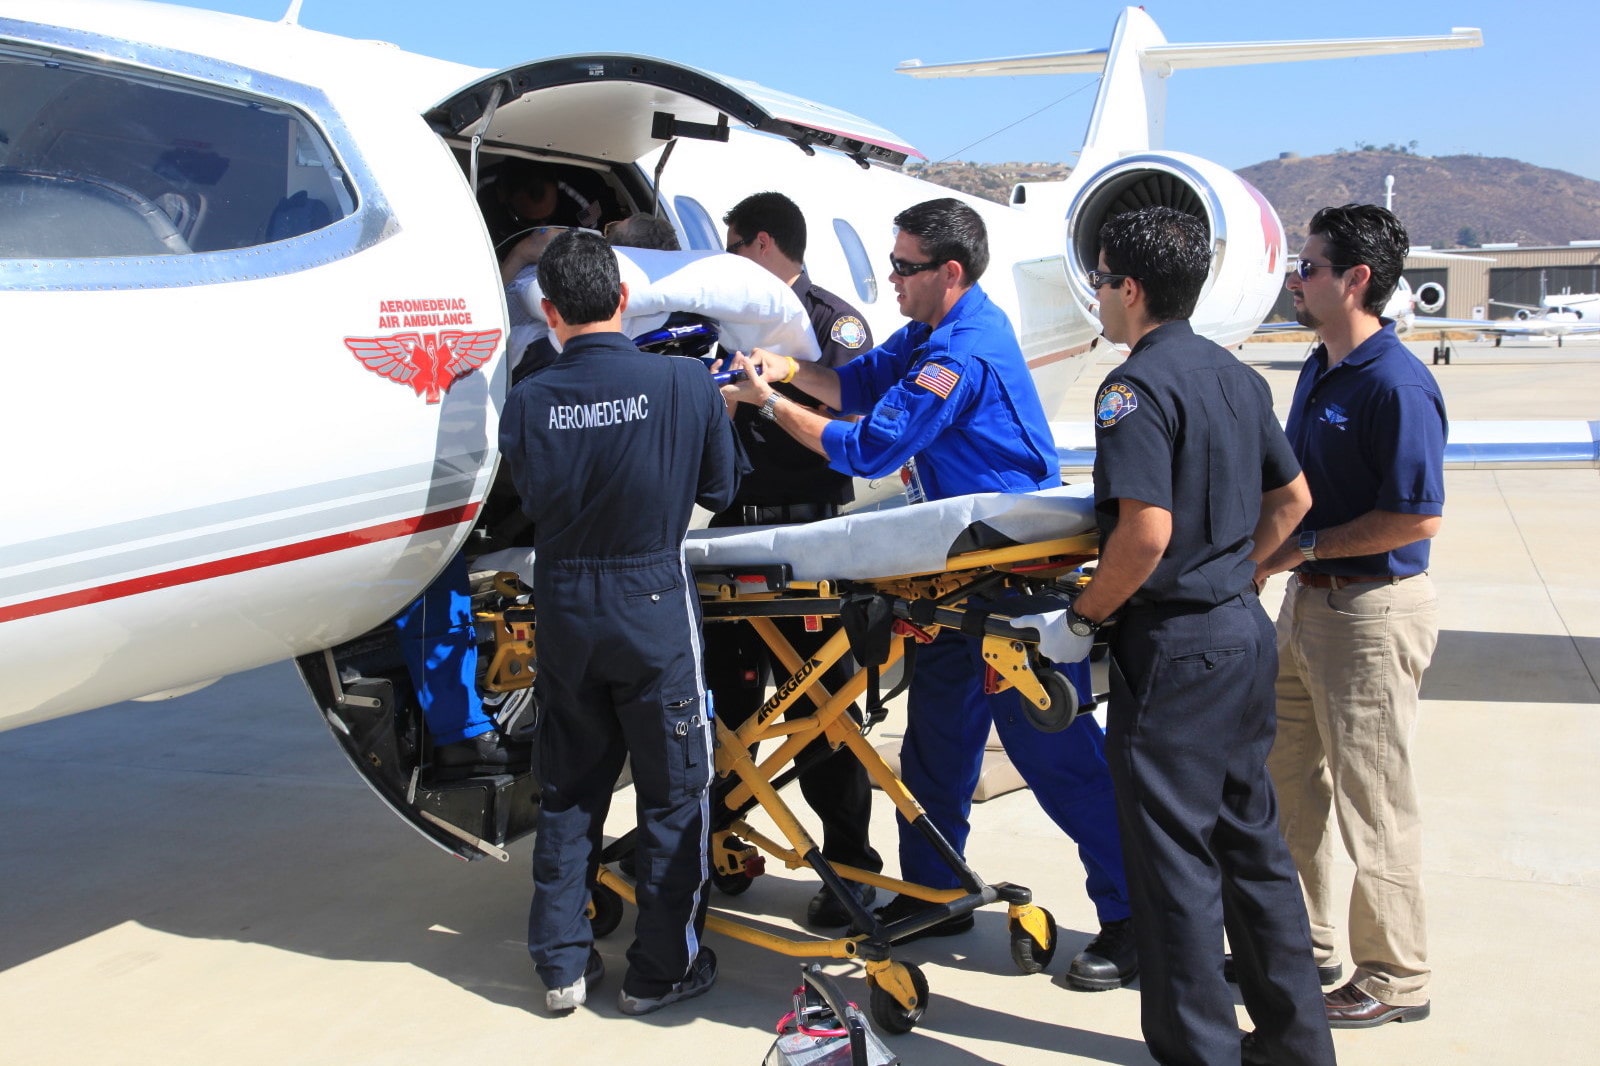 Aeromedevac air and ground teaming together to ensure a patient is onboard an aeromedevac jet plane properly